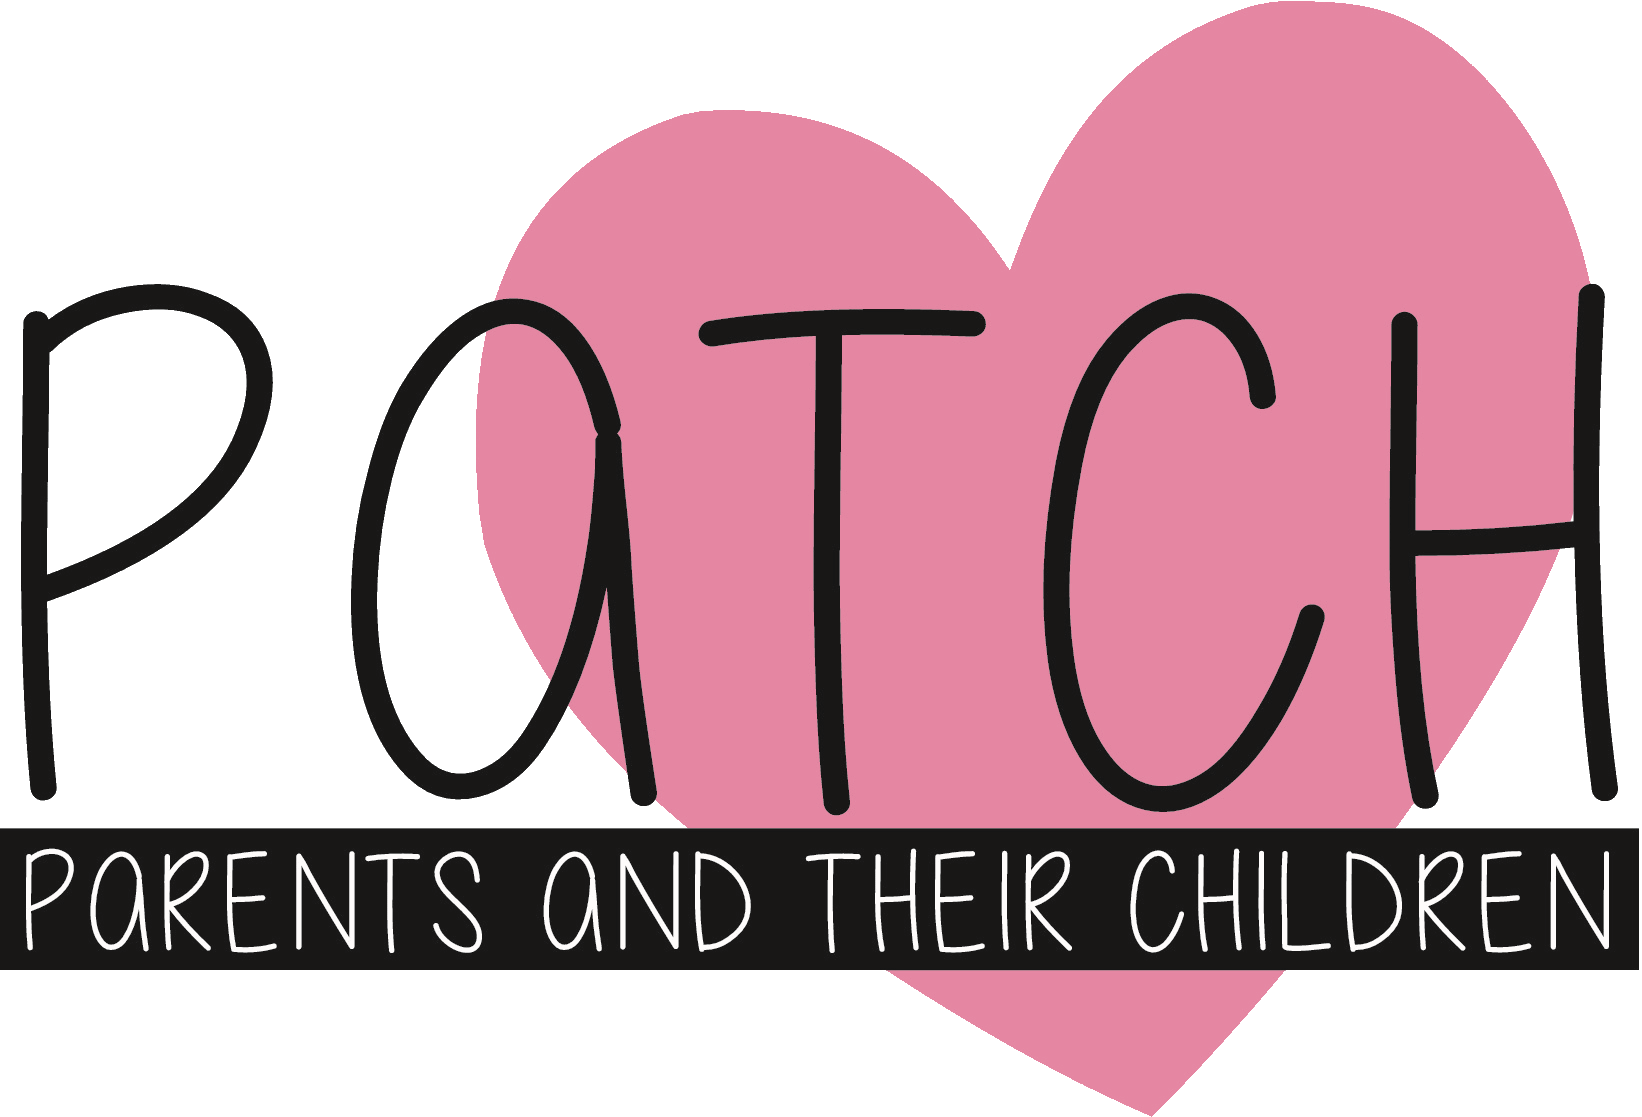 A not-for-profit organization dedicated to the children of moms in prison and strengthening the ties between them.